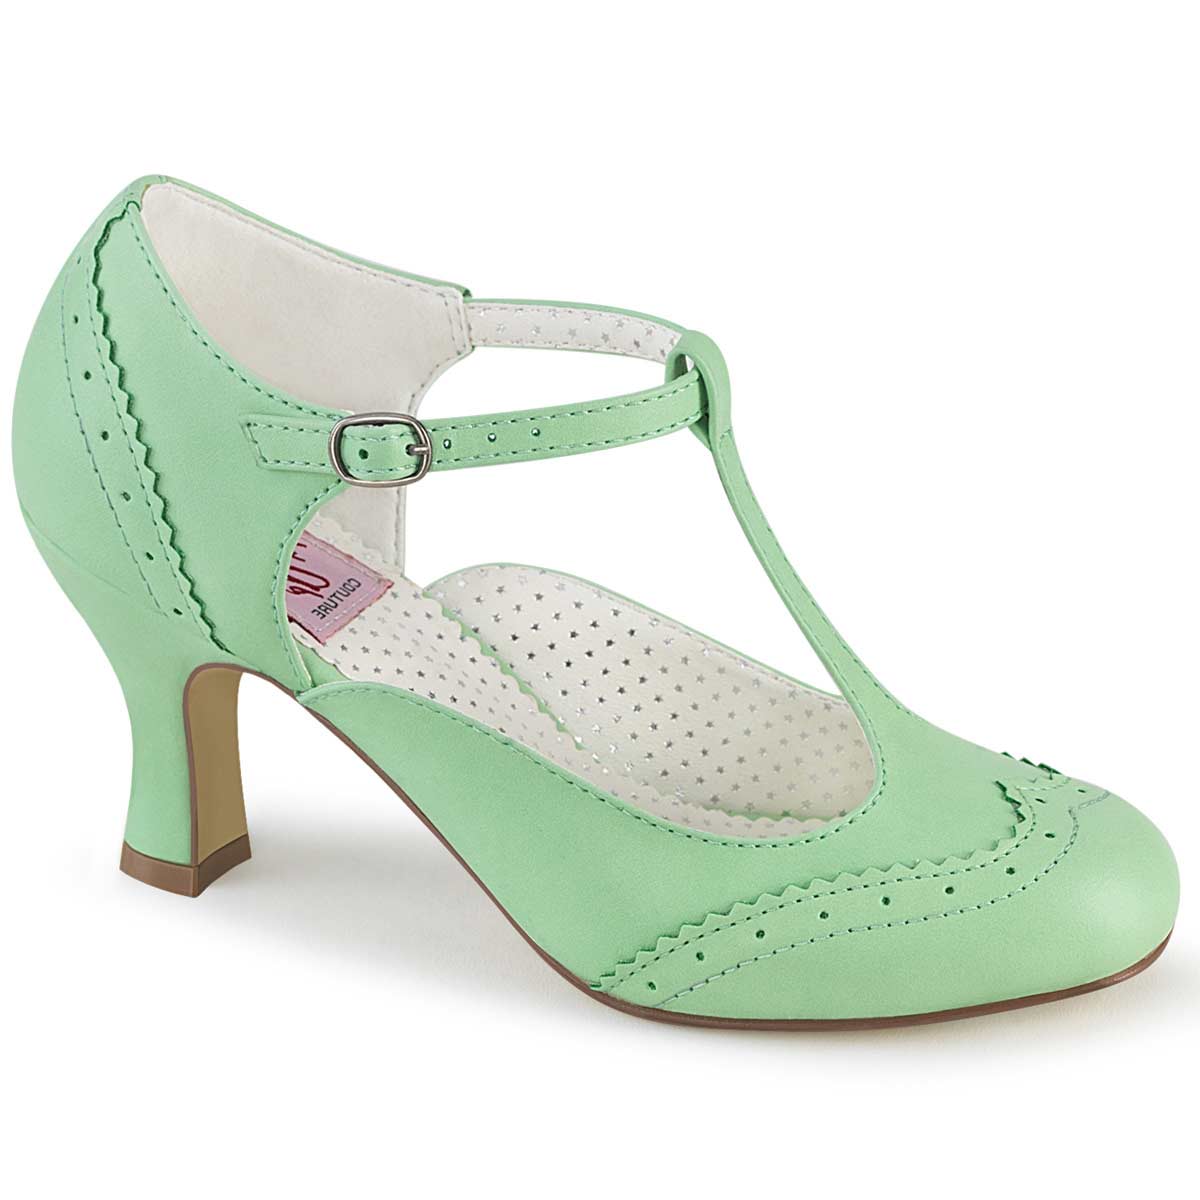 Pleaser Flapper-26 - Mint Faux Leather in Sexy Heels & Platforms - $51.91